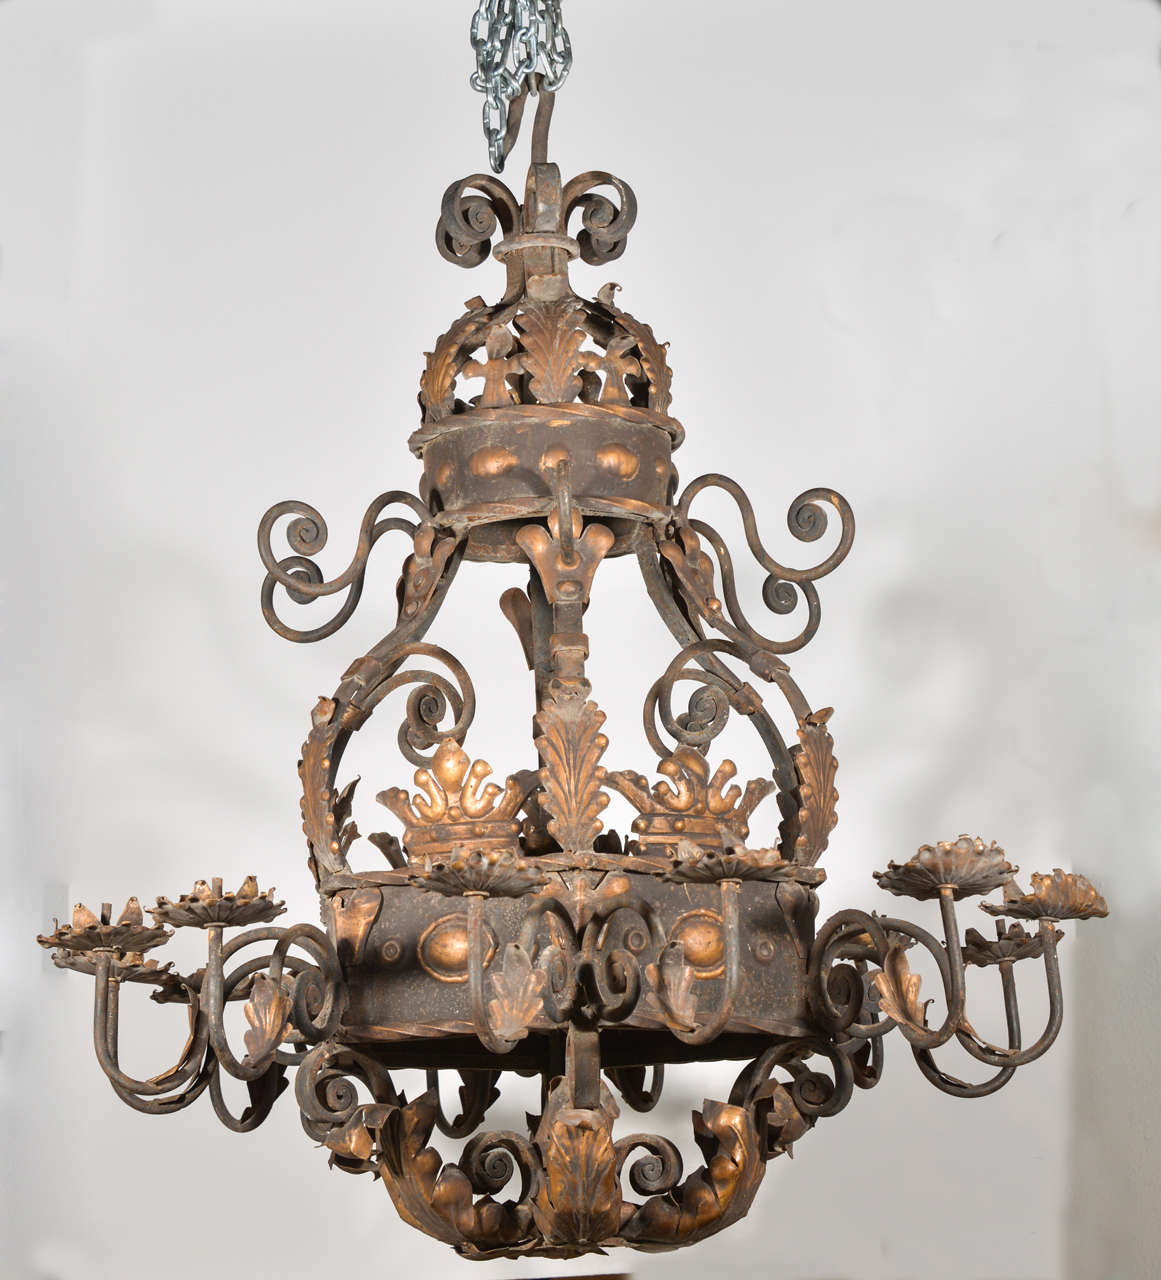 This French patinated metal and iron chandelier has curving, flowing lines of gilded c and s-scrolls with
acanthus leaf and crown motifs .  It has twelve arms emanating from a thick, six sided, partially gilded, decorated panel, with bobeches